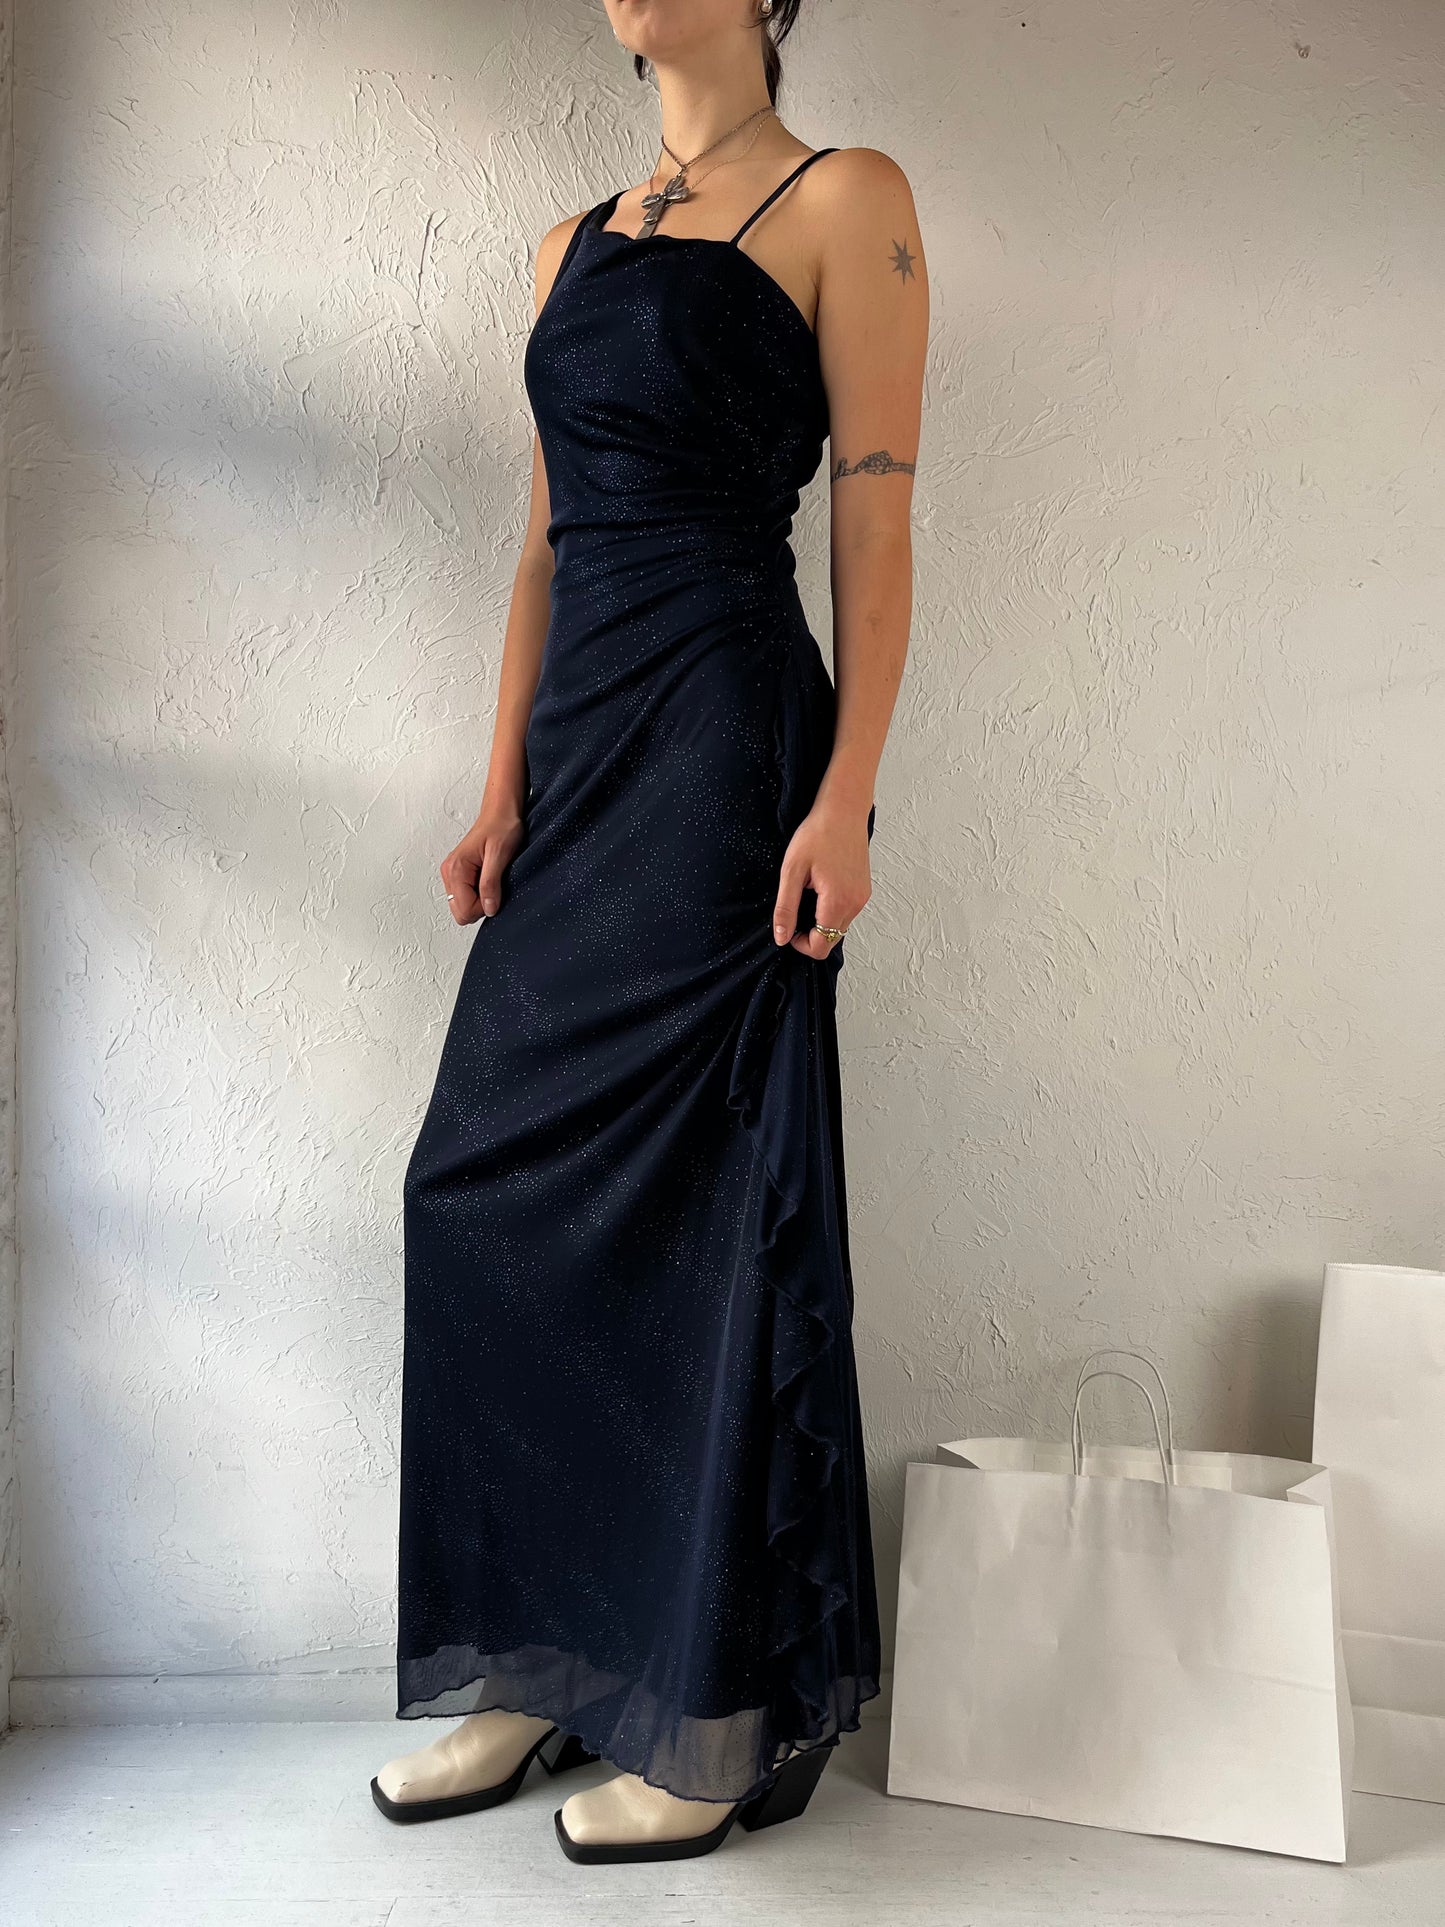 90s 'Jessica' Navy Blue One Shoulder Sparkly Evening Gown / Small - Medium